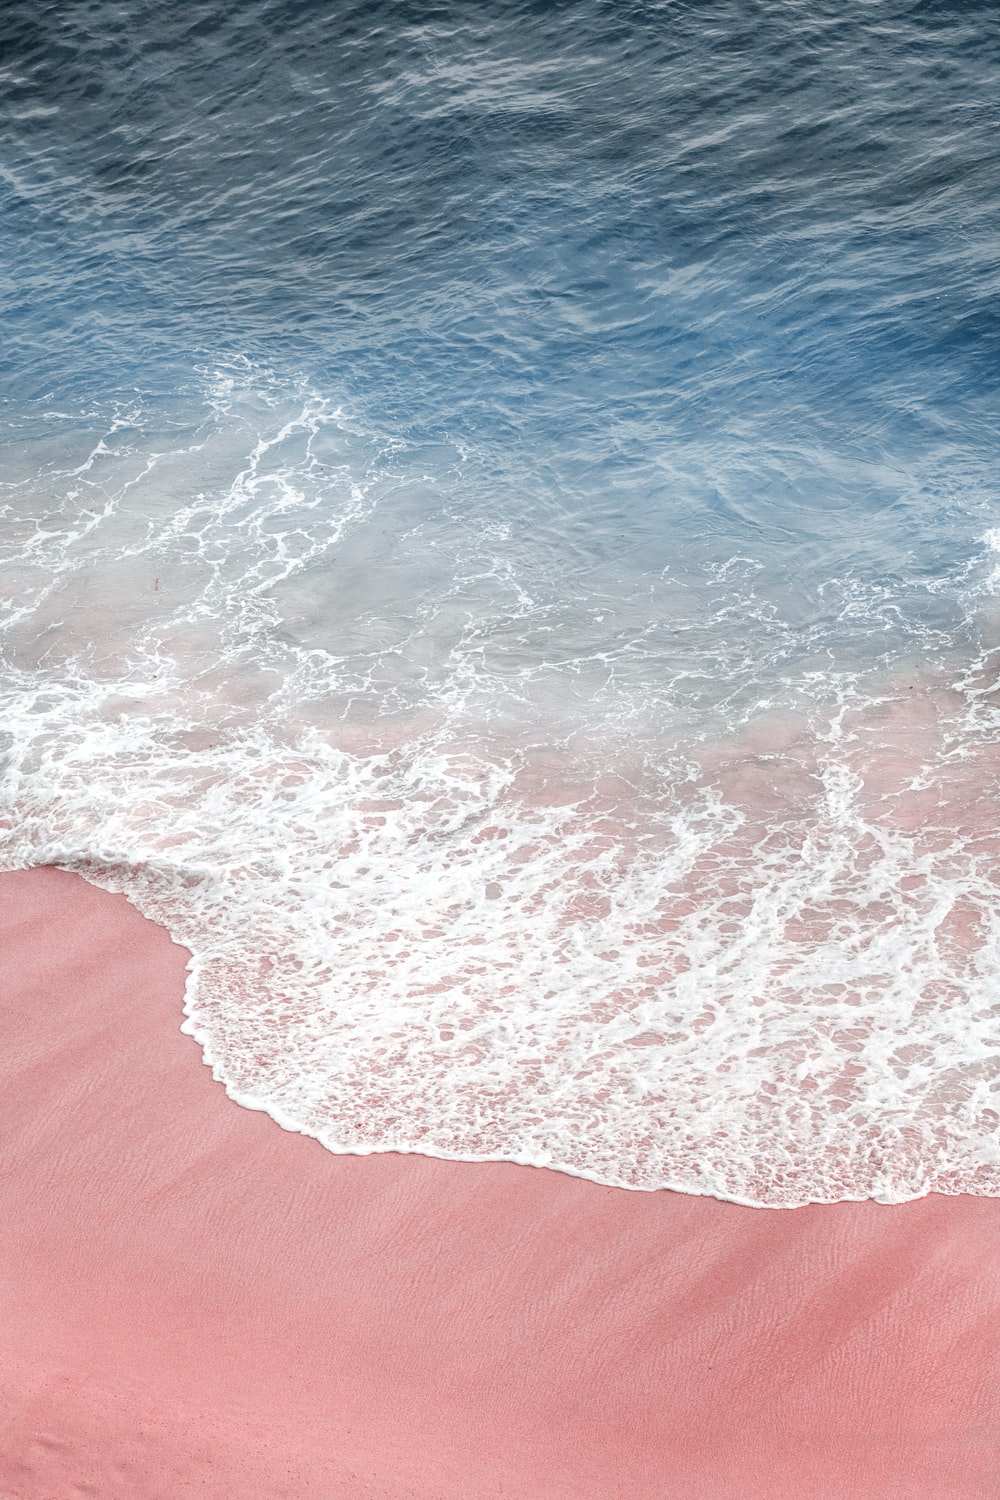 Pink Ocean Picture. Download Free Image